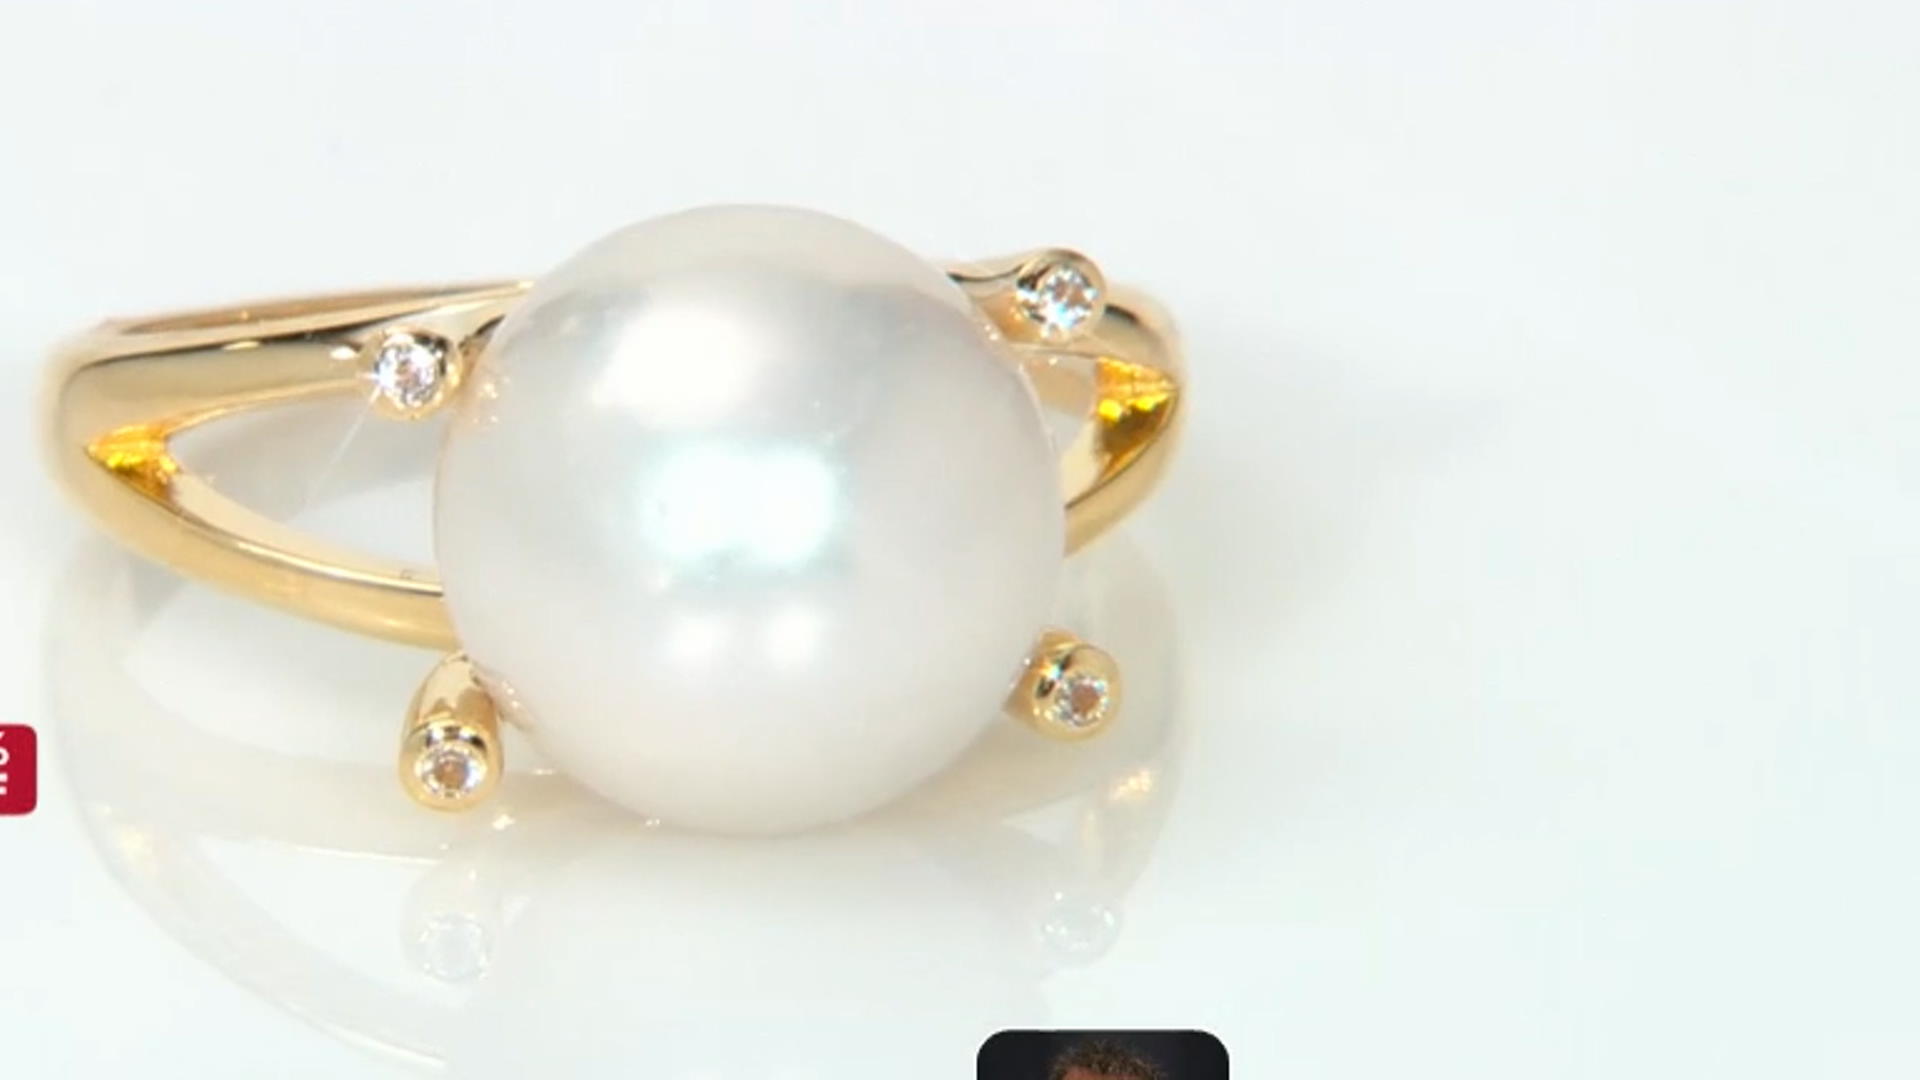 White Cultured Freshwater Pearl & White Topaz 18k Yellow Gold Over Sterling Silver Ring Video Thumbnail